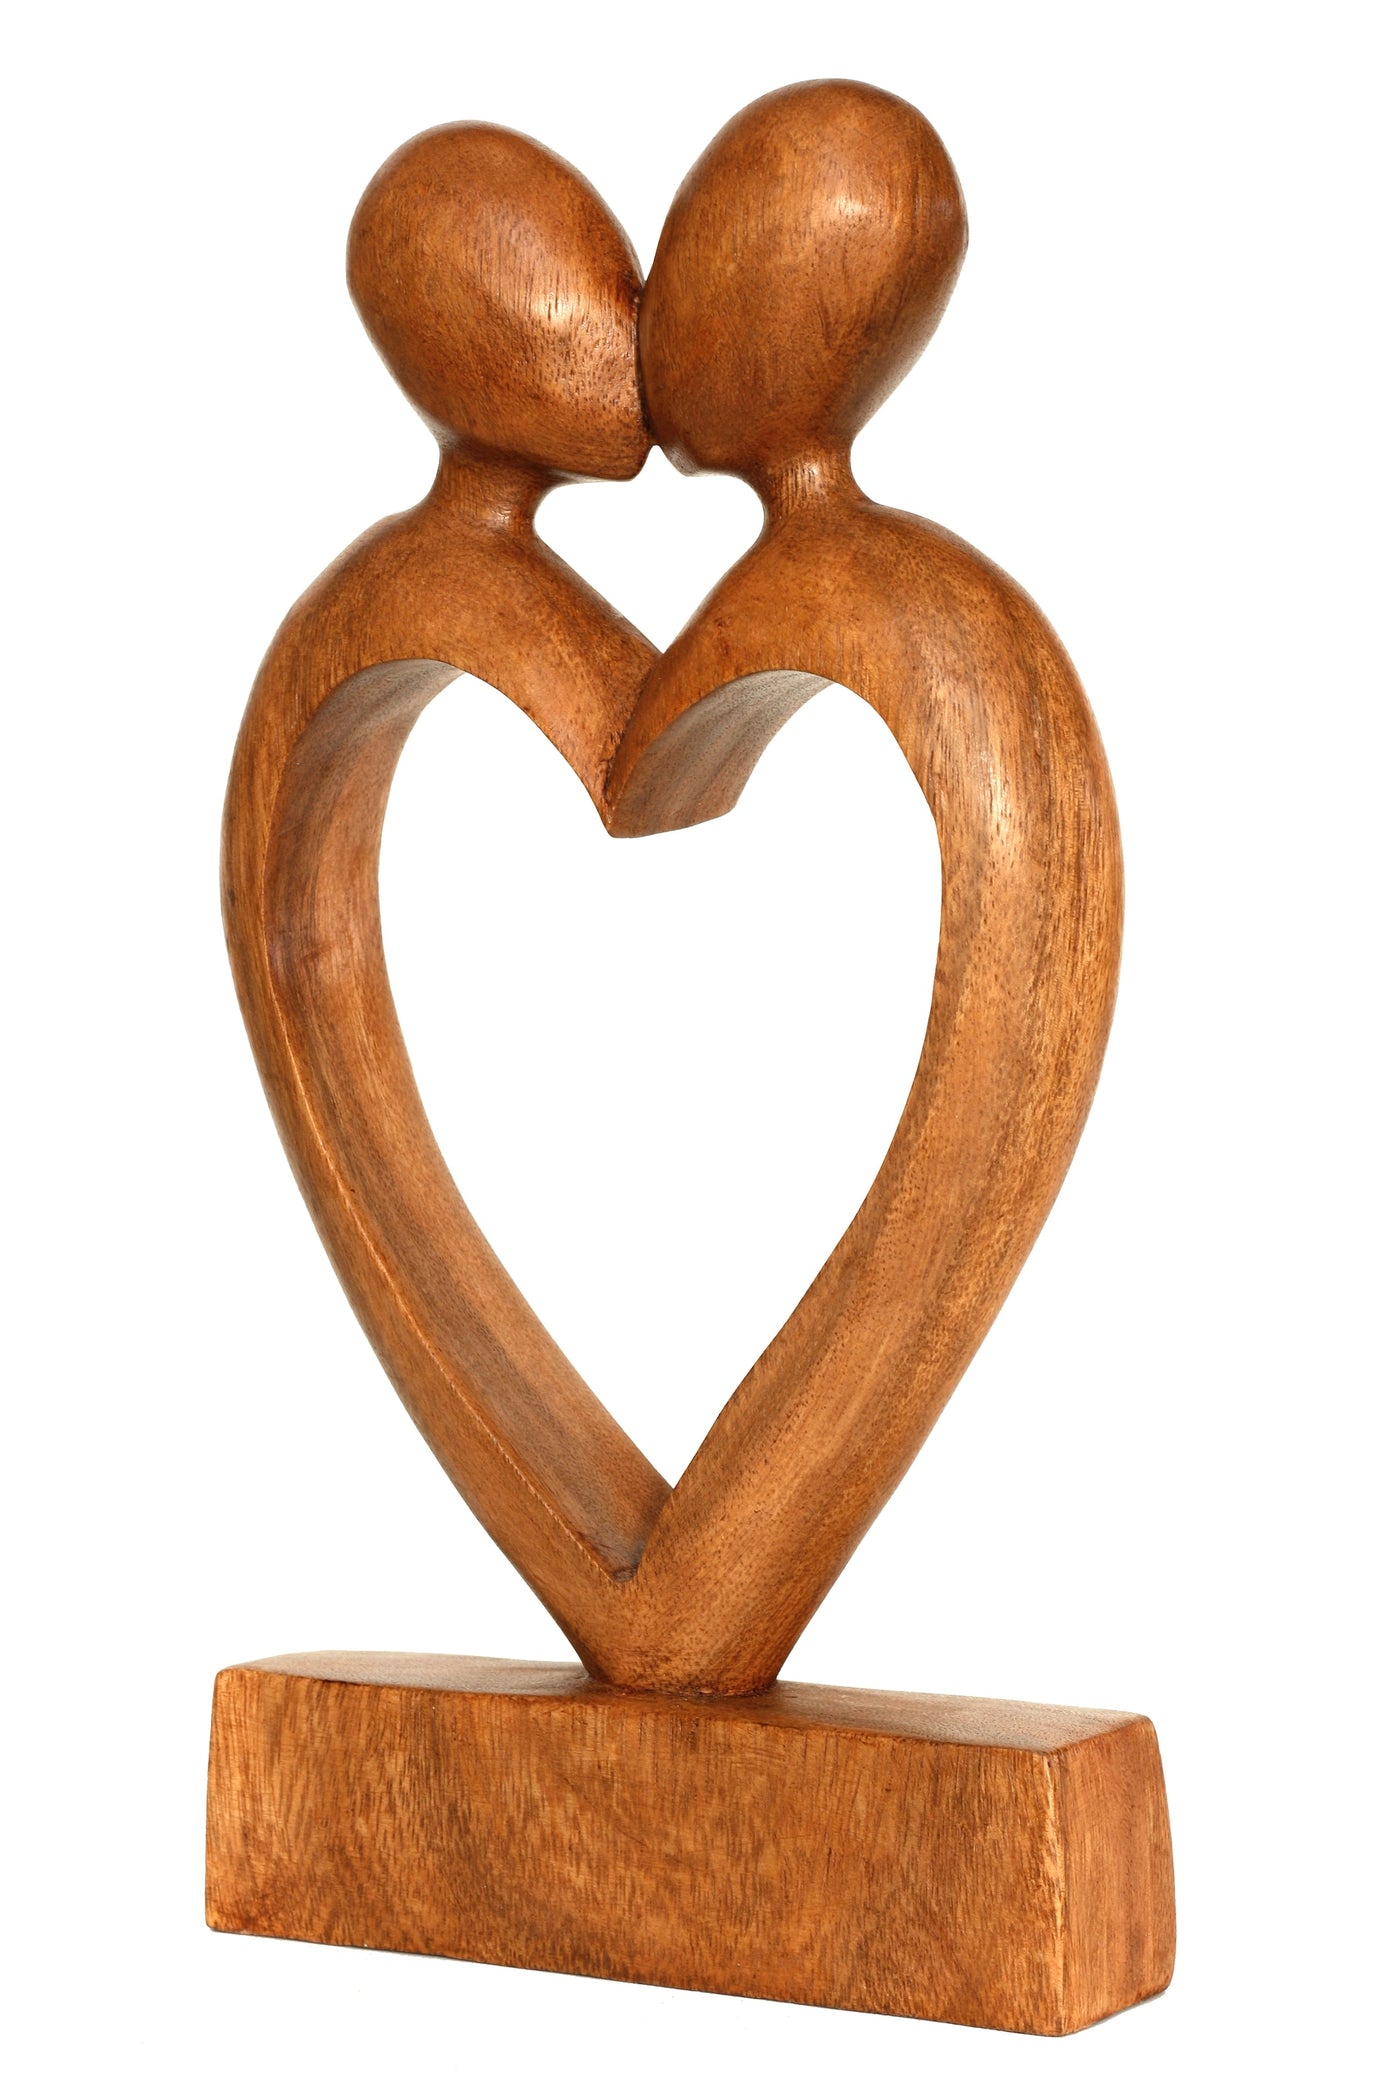 12" Wooden Handmade Abstract Sculpture Statue Handcrafted "Loving You" Gift Art Decorative Home Decor Figurine Accent Decoration Artwork Hand Carved